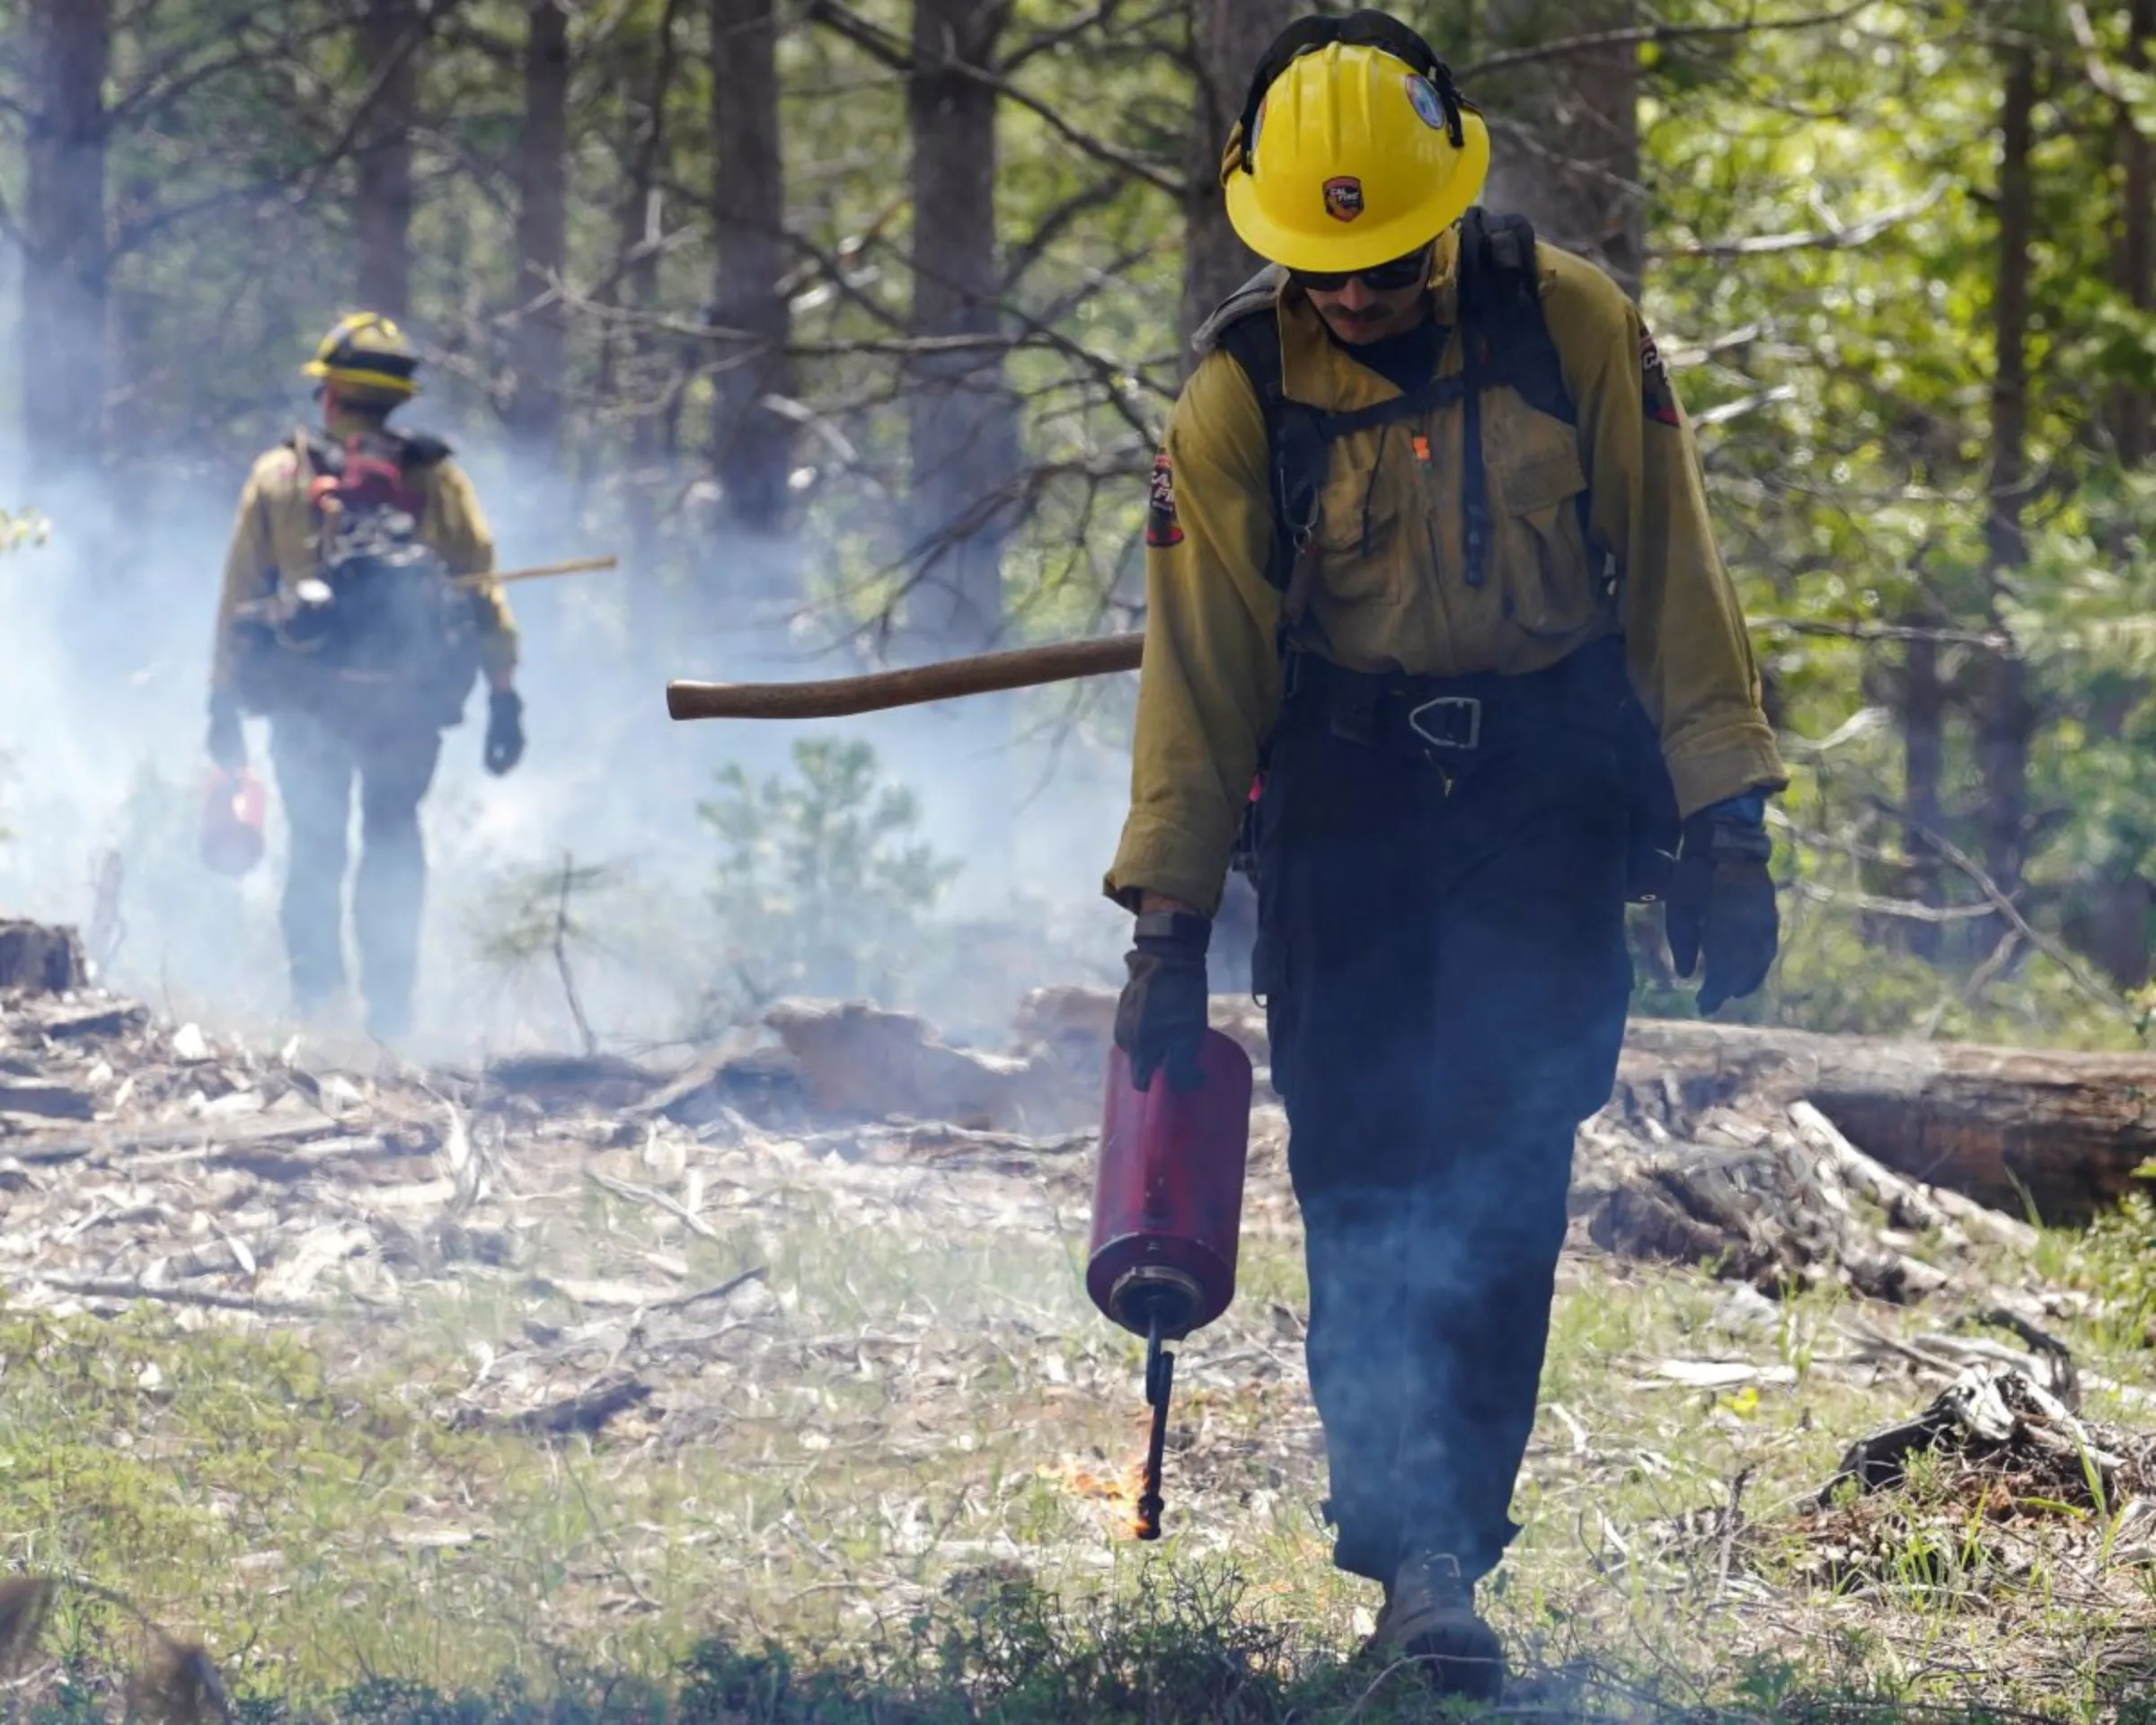 CAL FIRE firefighters from Tuolumne County's Baseline Fire Center use drip torches to light a prescribed burn, designed to help control potential wildfires, in the Stanislaus National Forest near Yosemite, California, U.S. May 8, 2023